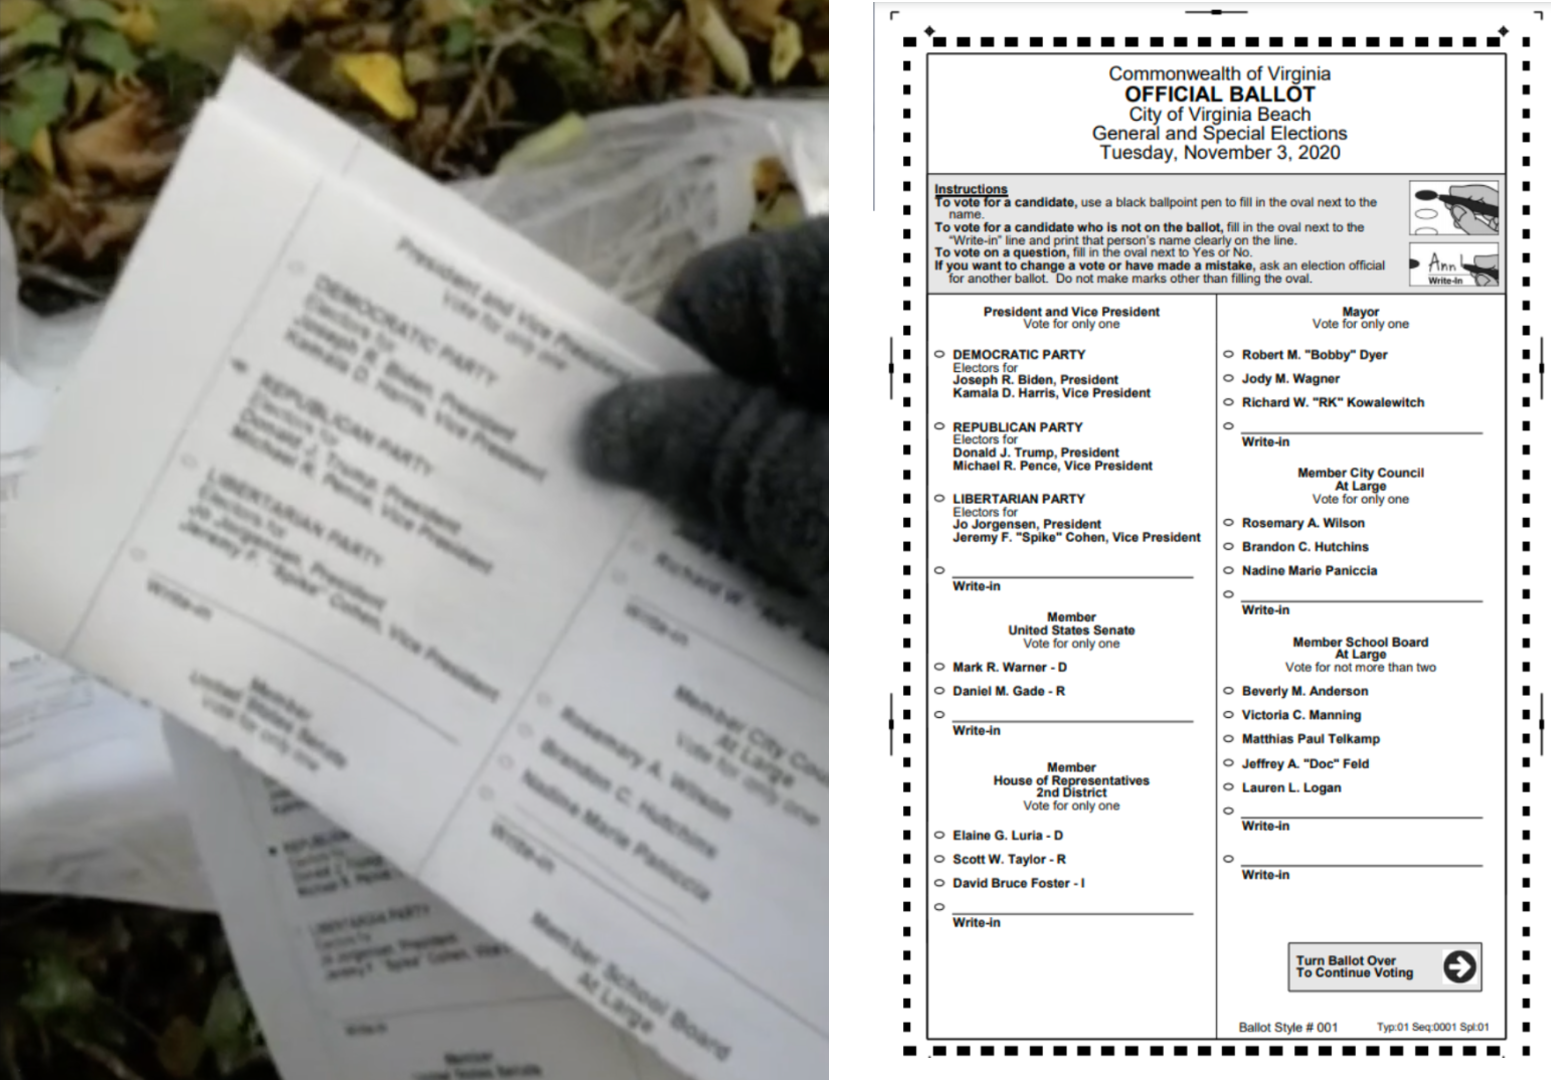 Sample ballots from a viral video (left) and what real ballots look like in Virginia, complete with bar code markings (right) (Image: Twitter/City of Virginia Beach)